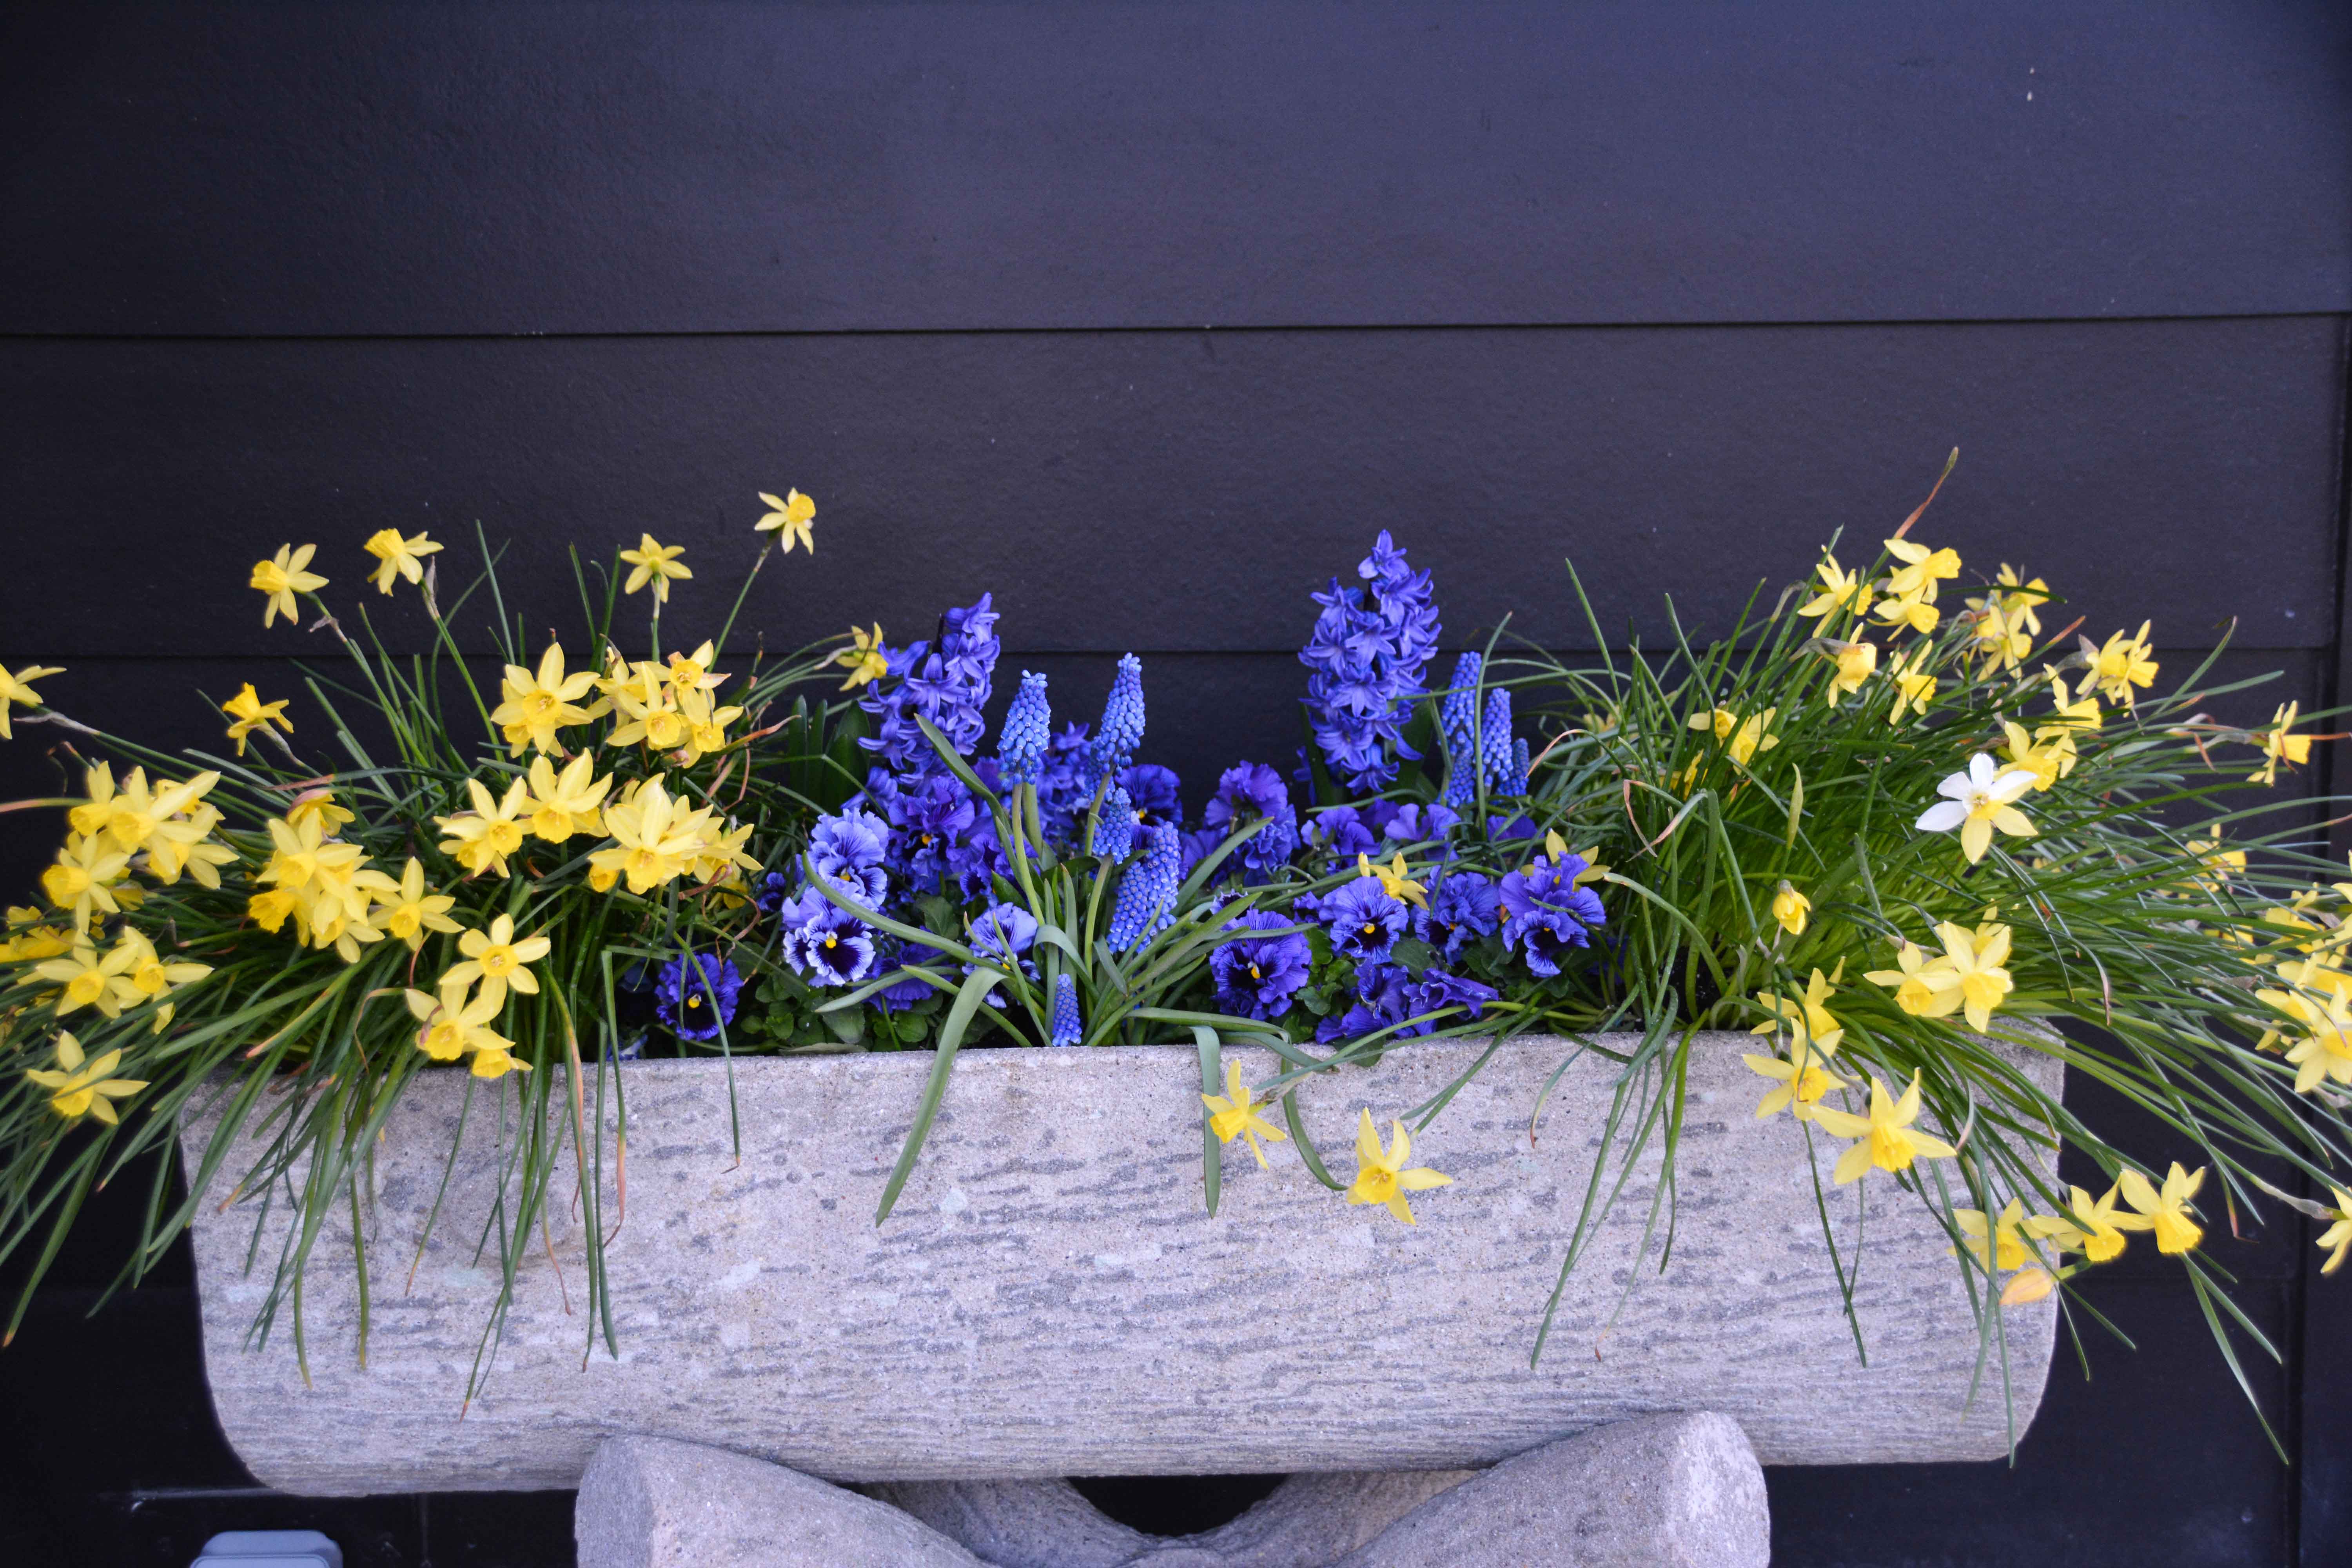 This container features Narcissus ‘Lemon Sailboat’ planted on the ends of the faux bois planter. The center is filled with a mix of Hyacinth Blue Jacket, Muscari armenicum and Viola 'Frizzle Sizzle Blue'. The fragrance when you walk past this container is intoxicating.  thinkingoutsidetheboxwood.com